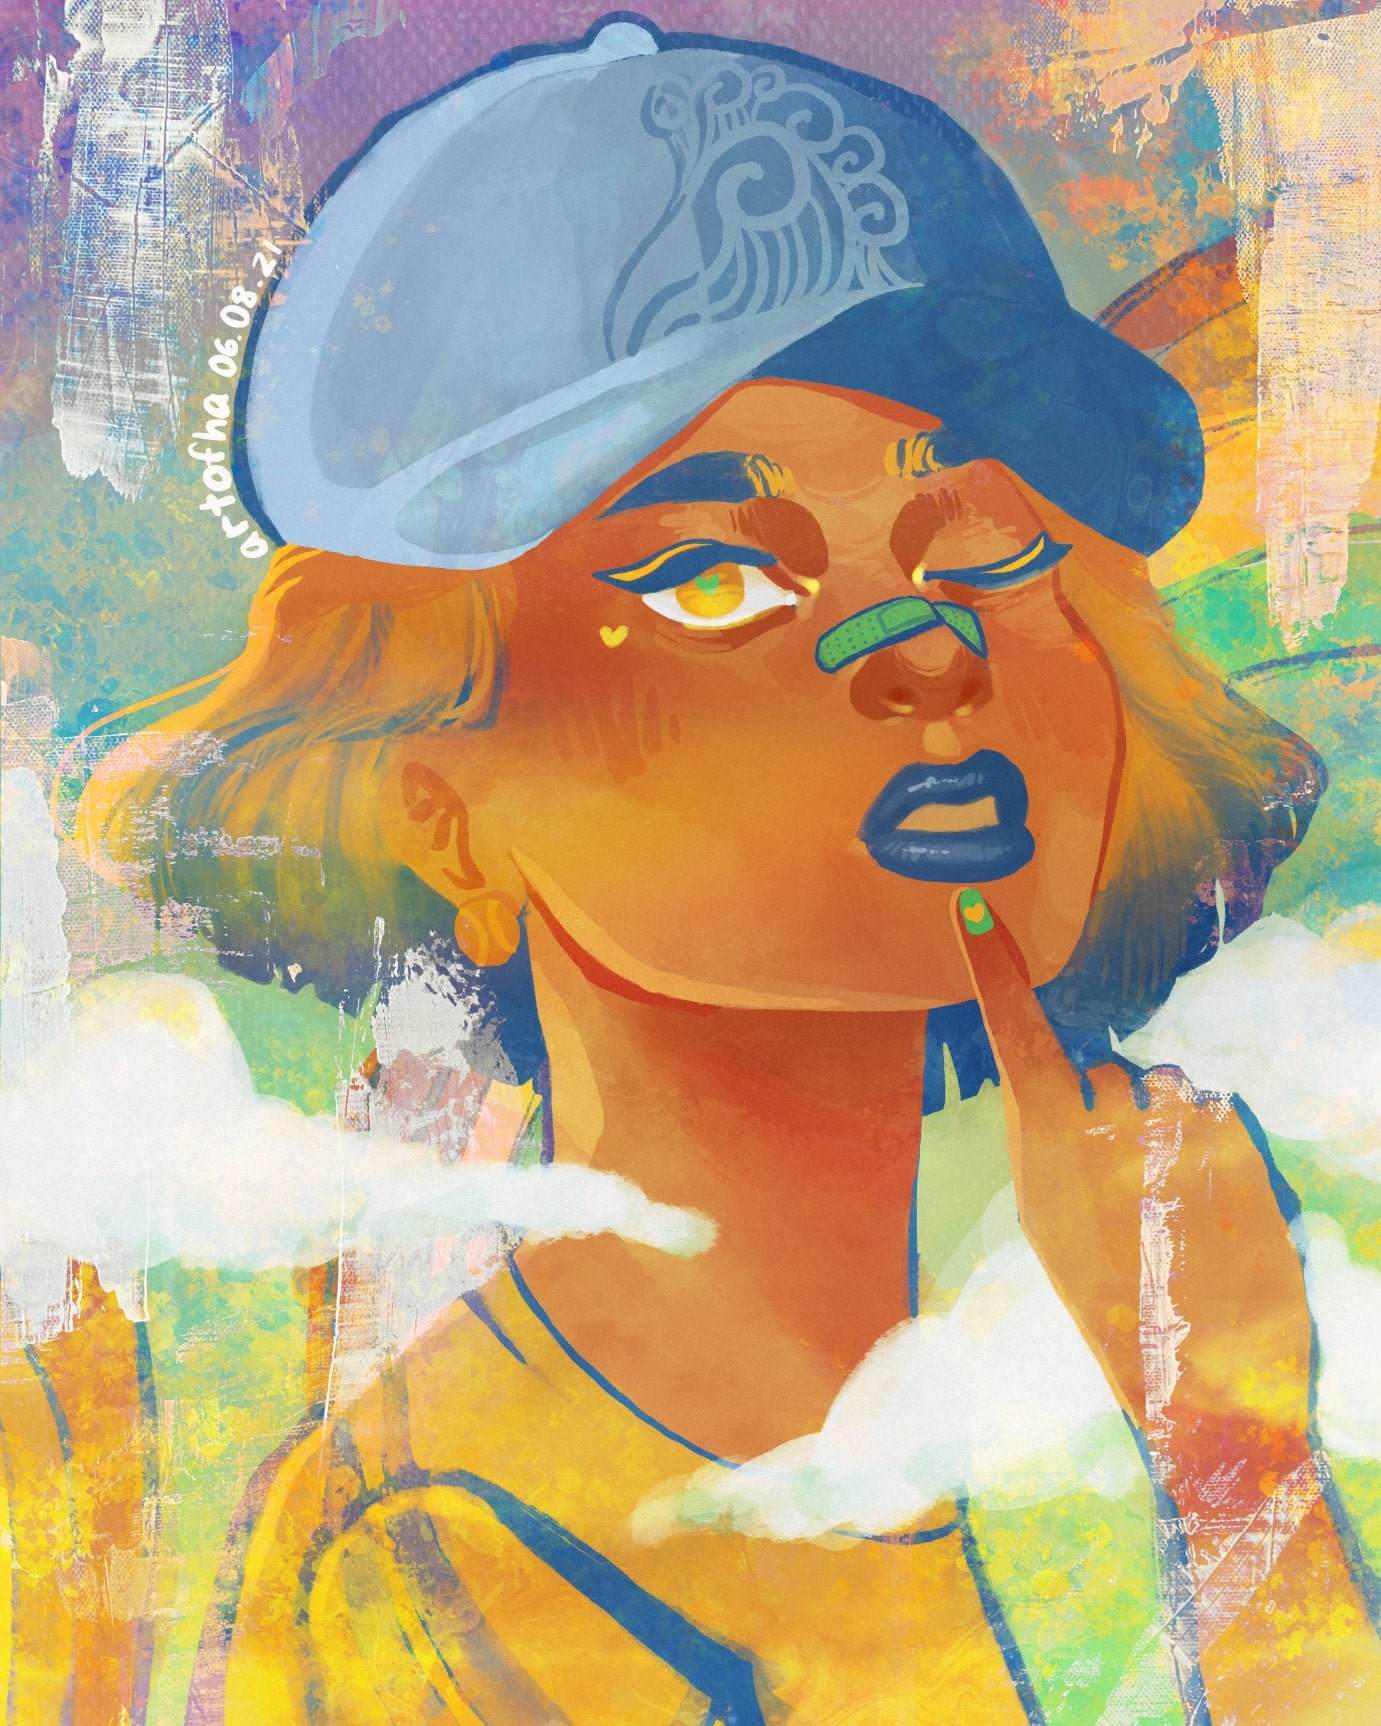 a digital painted illustration of a gold and blue haired gold-skinned girl wearing a blue baseball cap